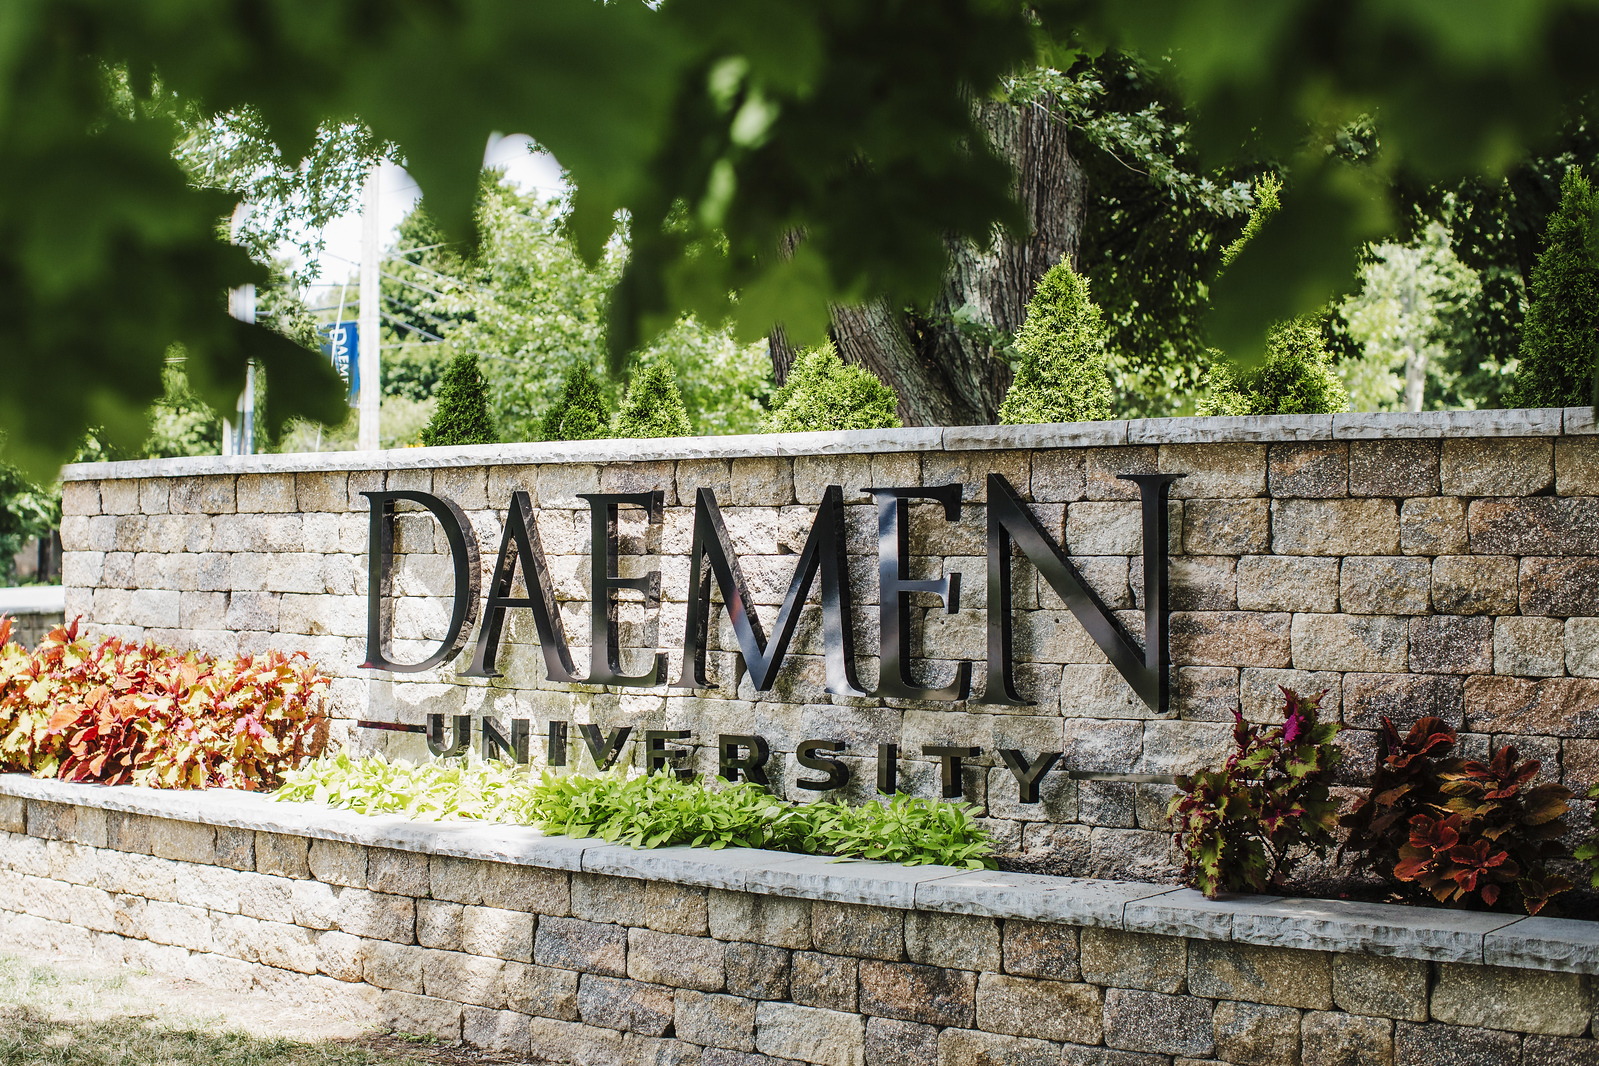 Daemen Recognized as a University in Milestone 75th Anniversary Year